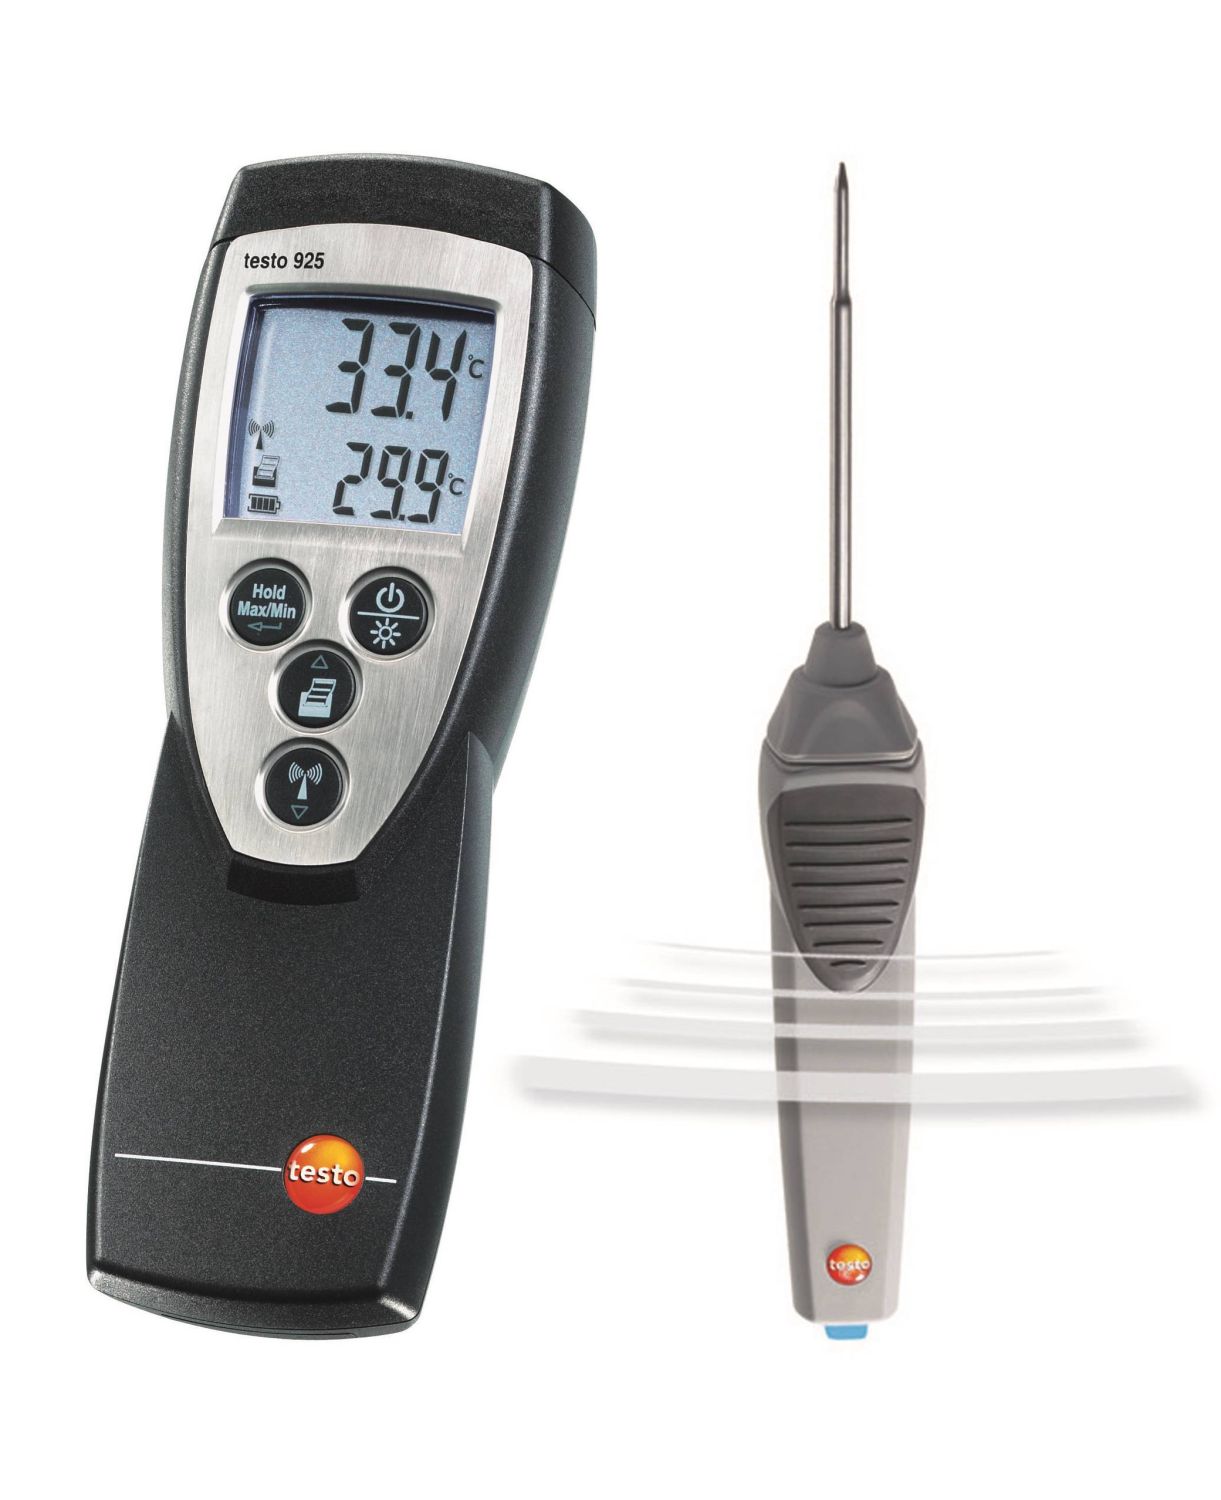 Testo for measure temperature for water and air-